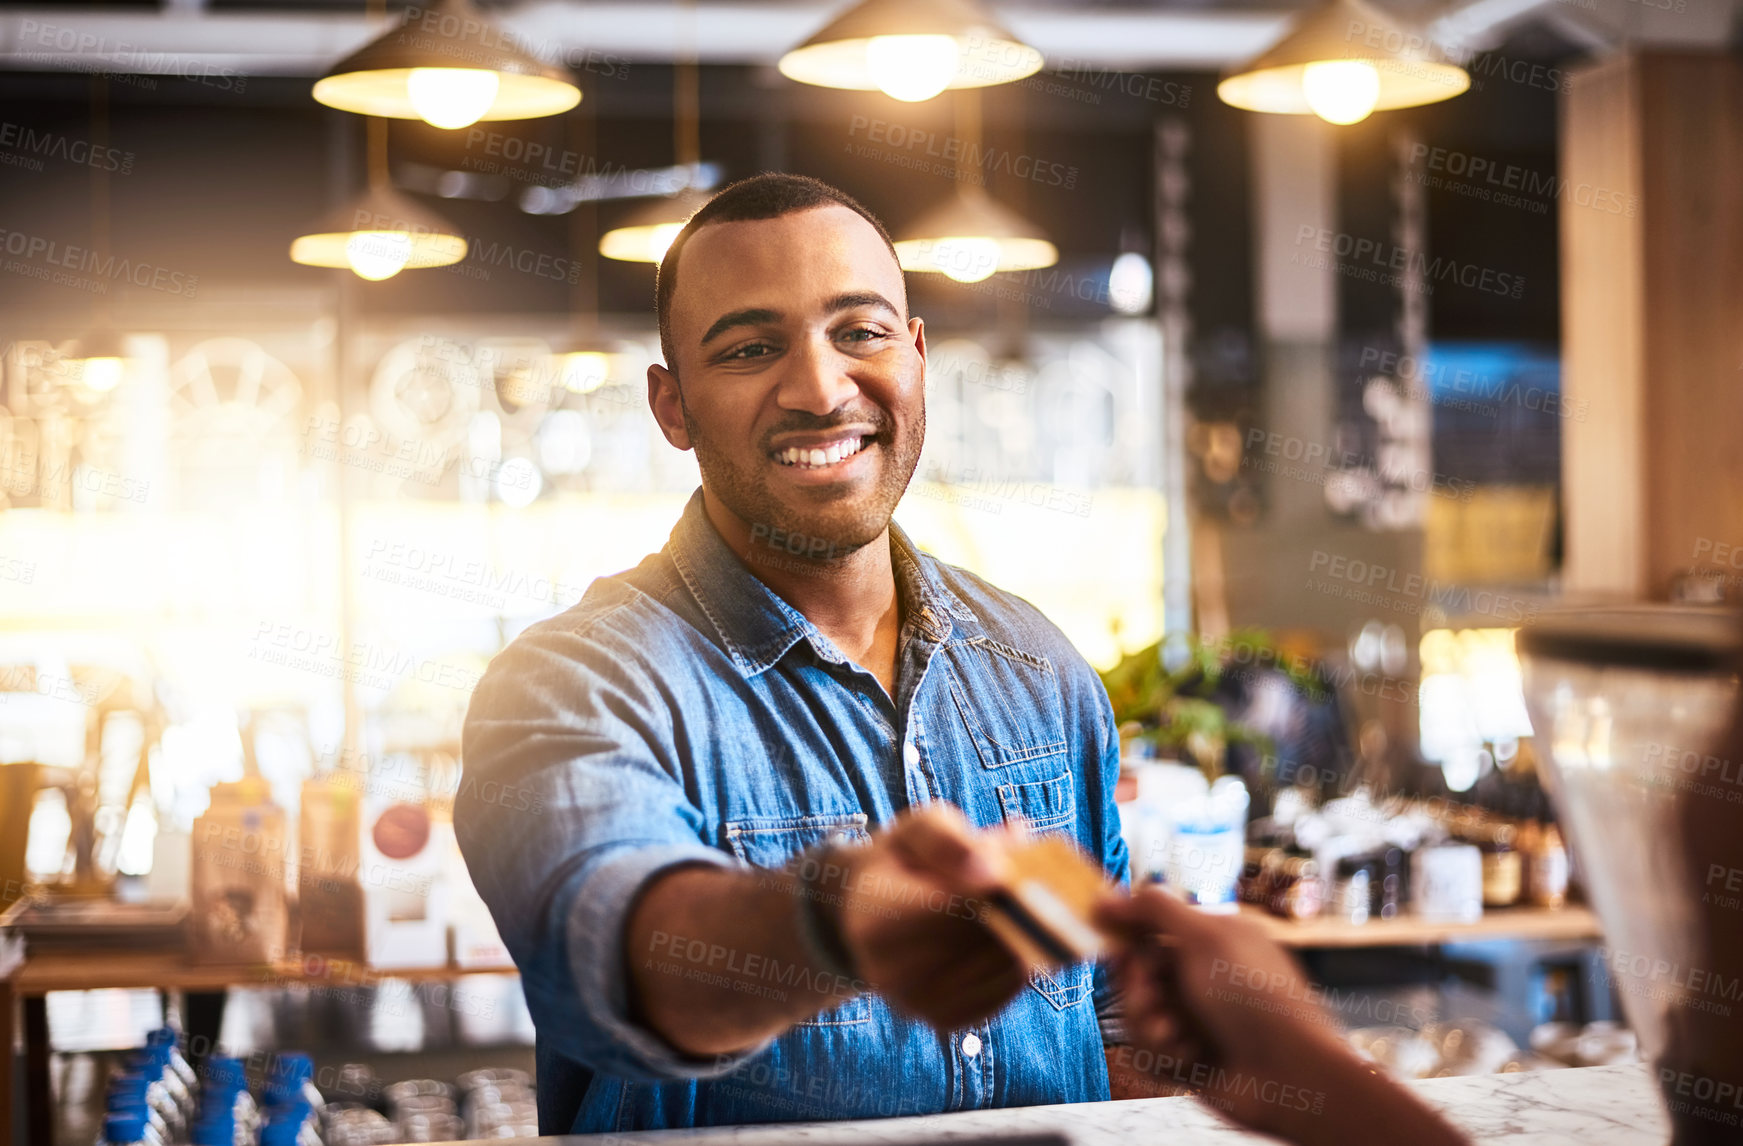 Buy stock photo Shot of a customer making a credit card payment in a cafe